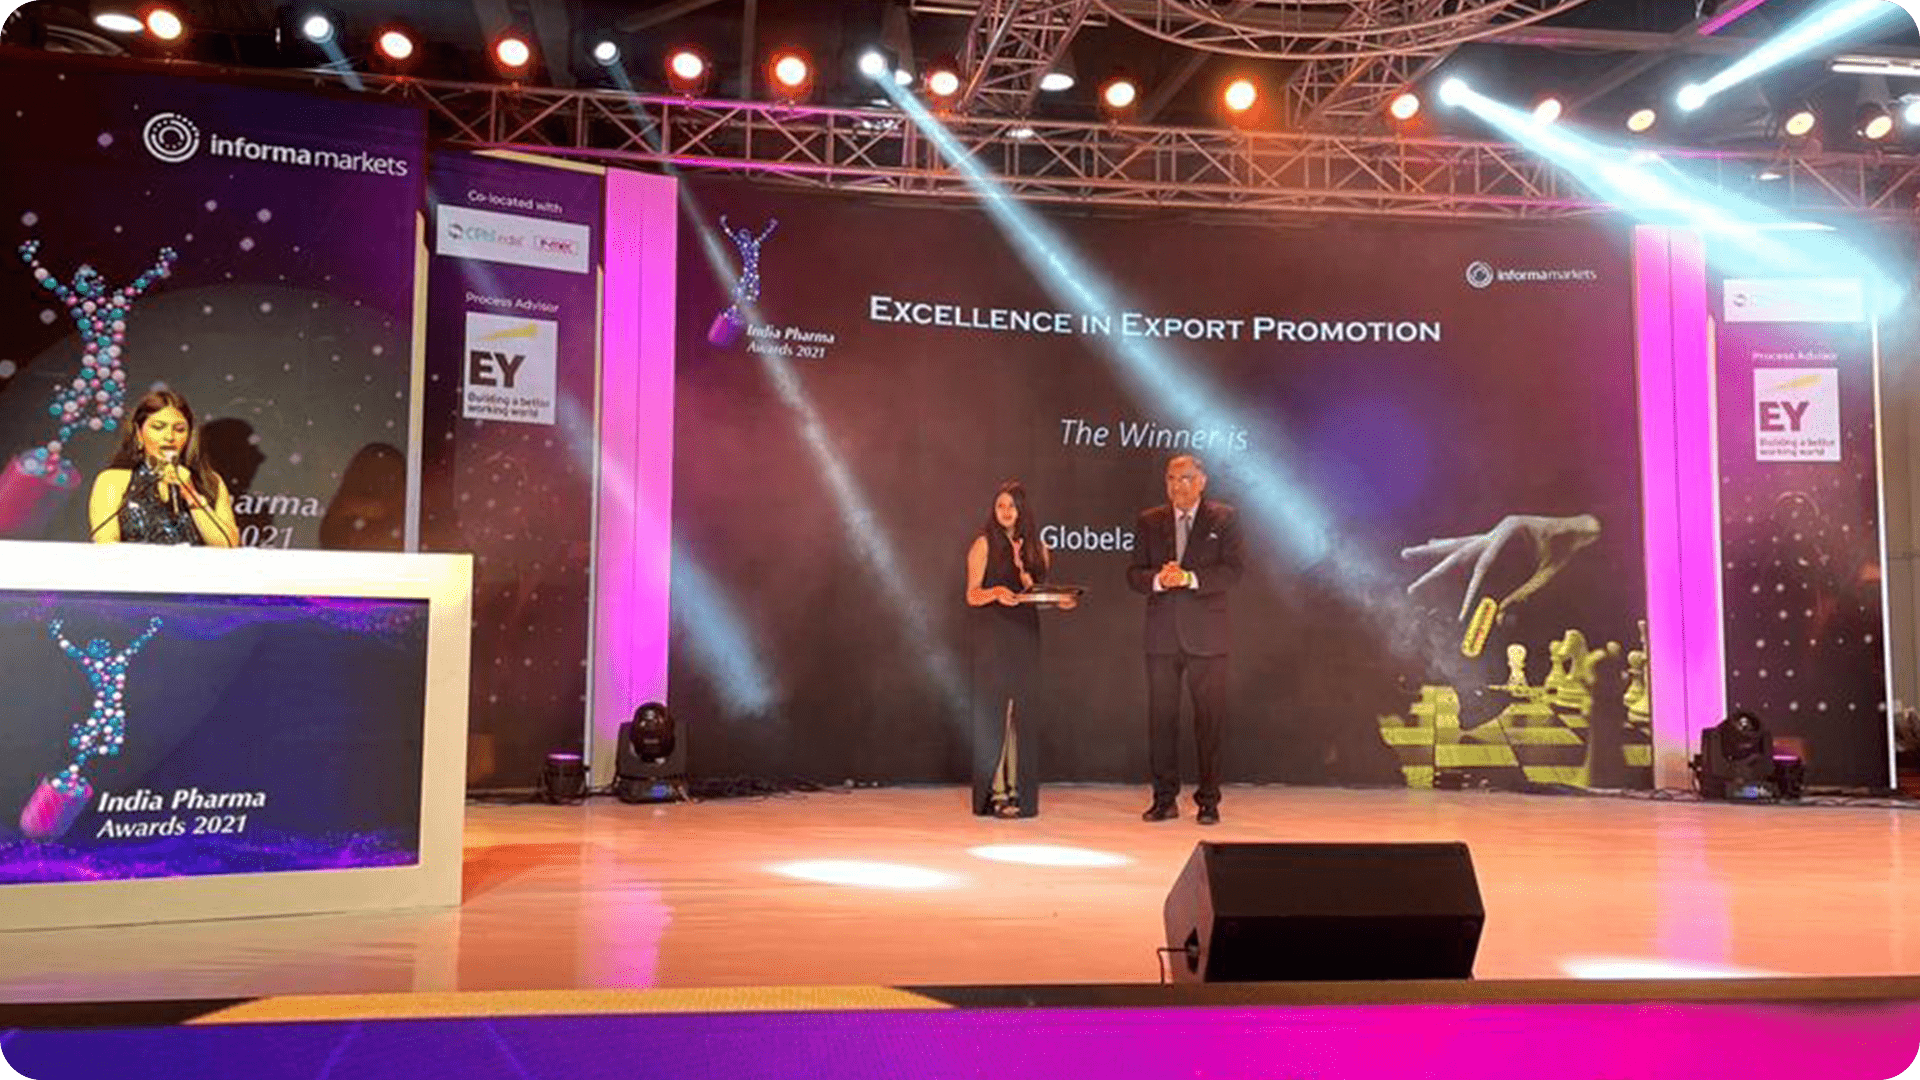 Excellence in Export Promotion - Indian Pharma Awards 2021